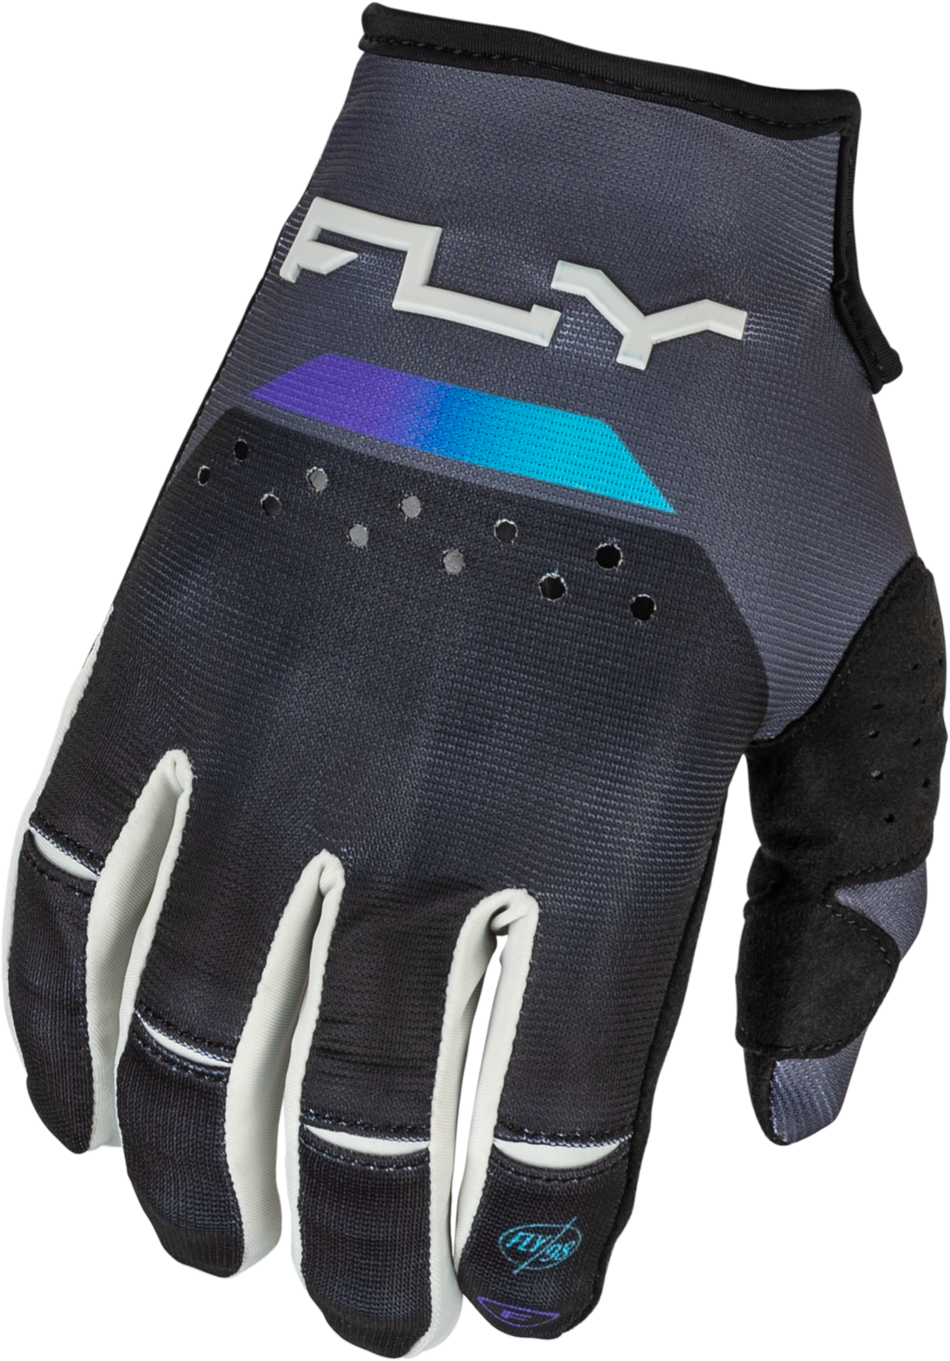 FLY RACING Kinetic Reload Gloves Charcoal/Black/Blue Iridium Md 377-510M